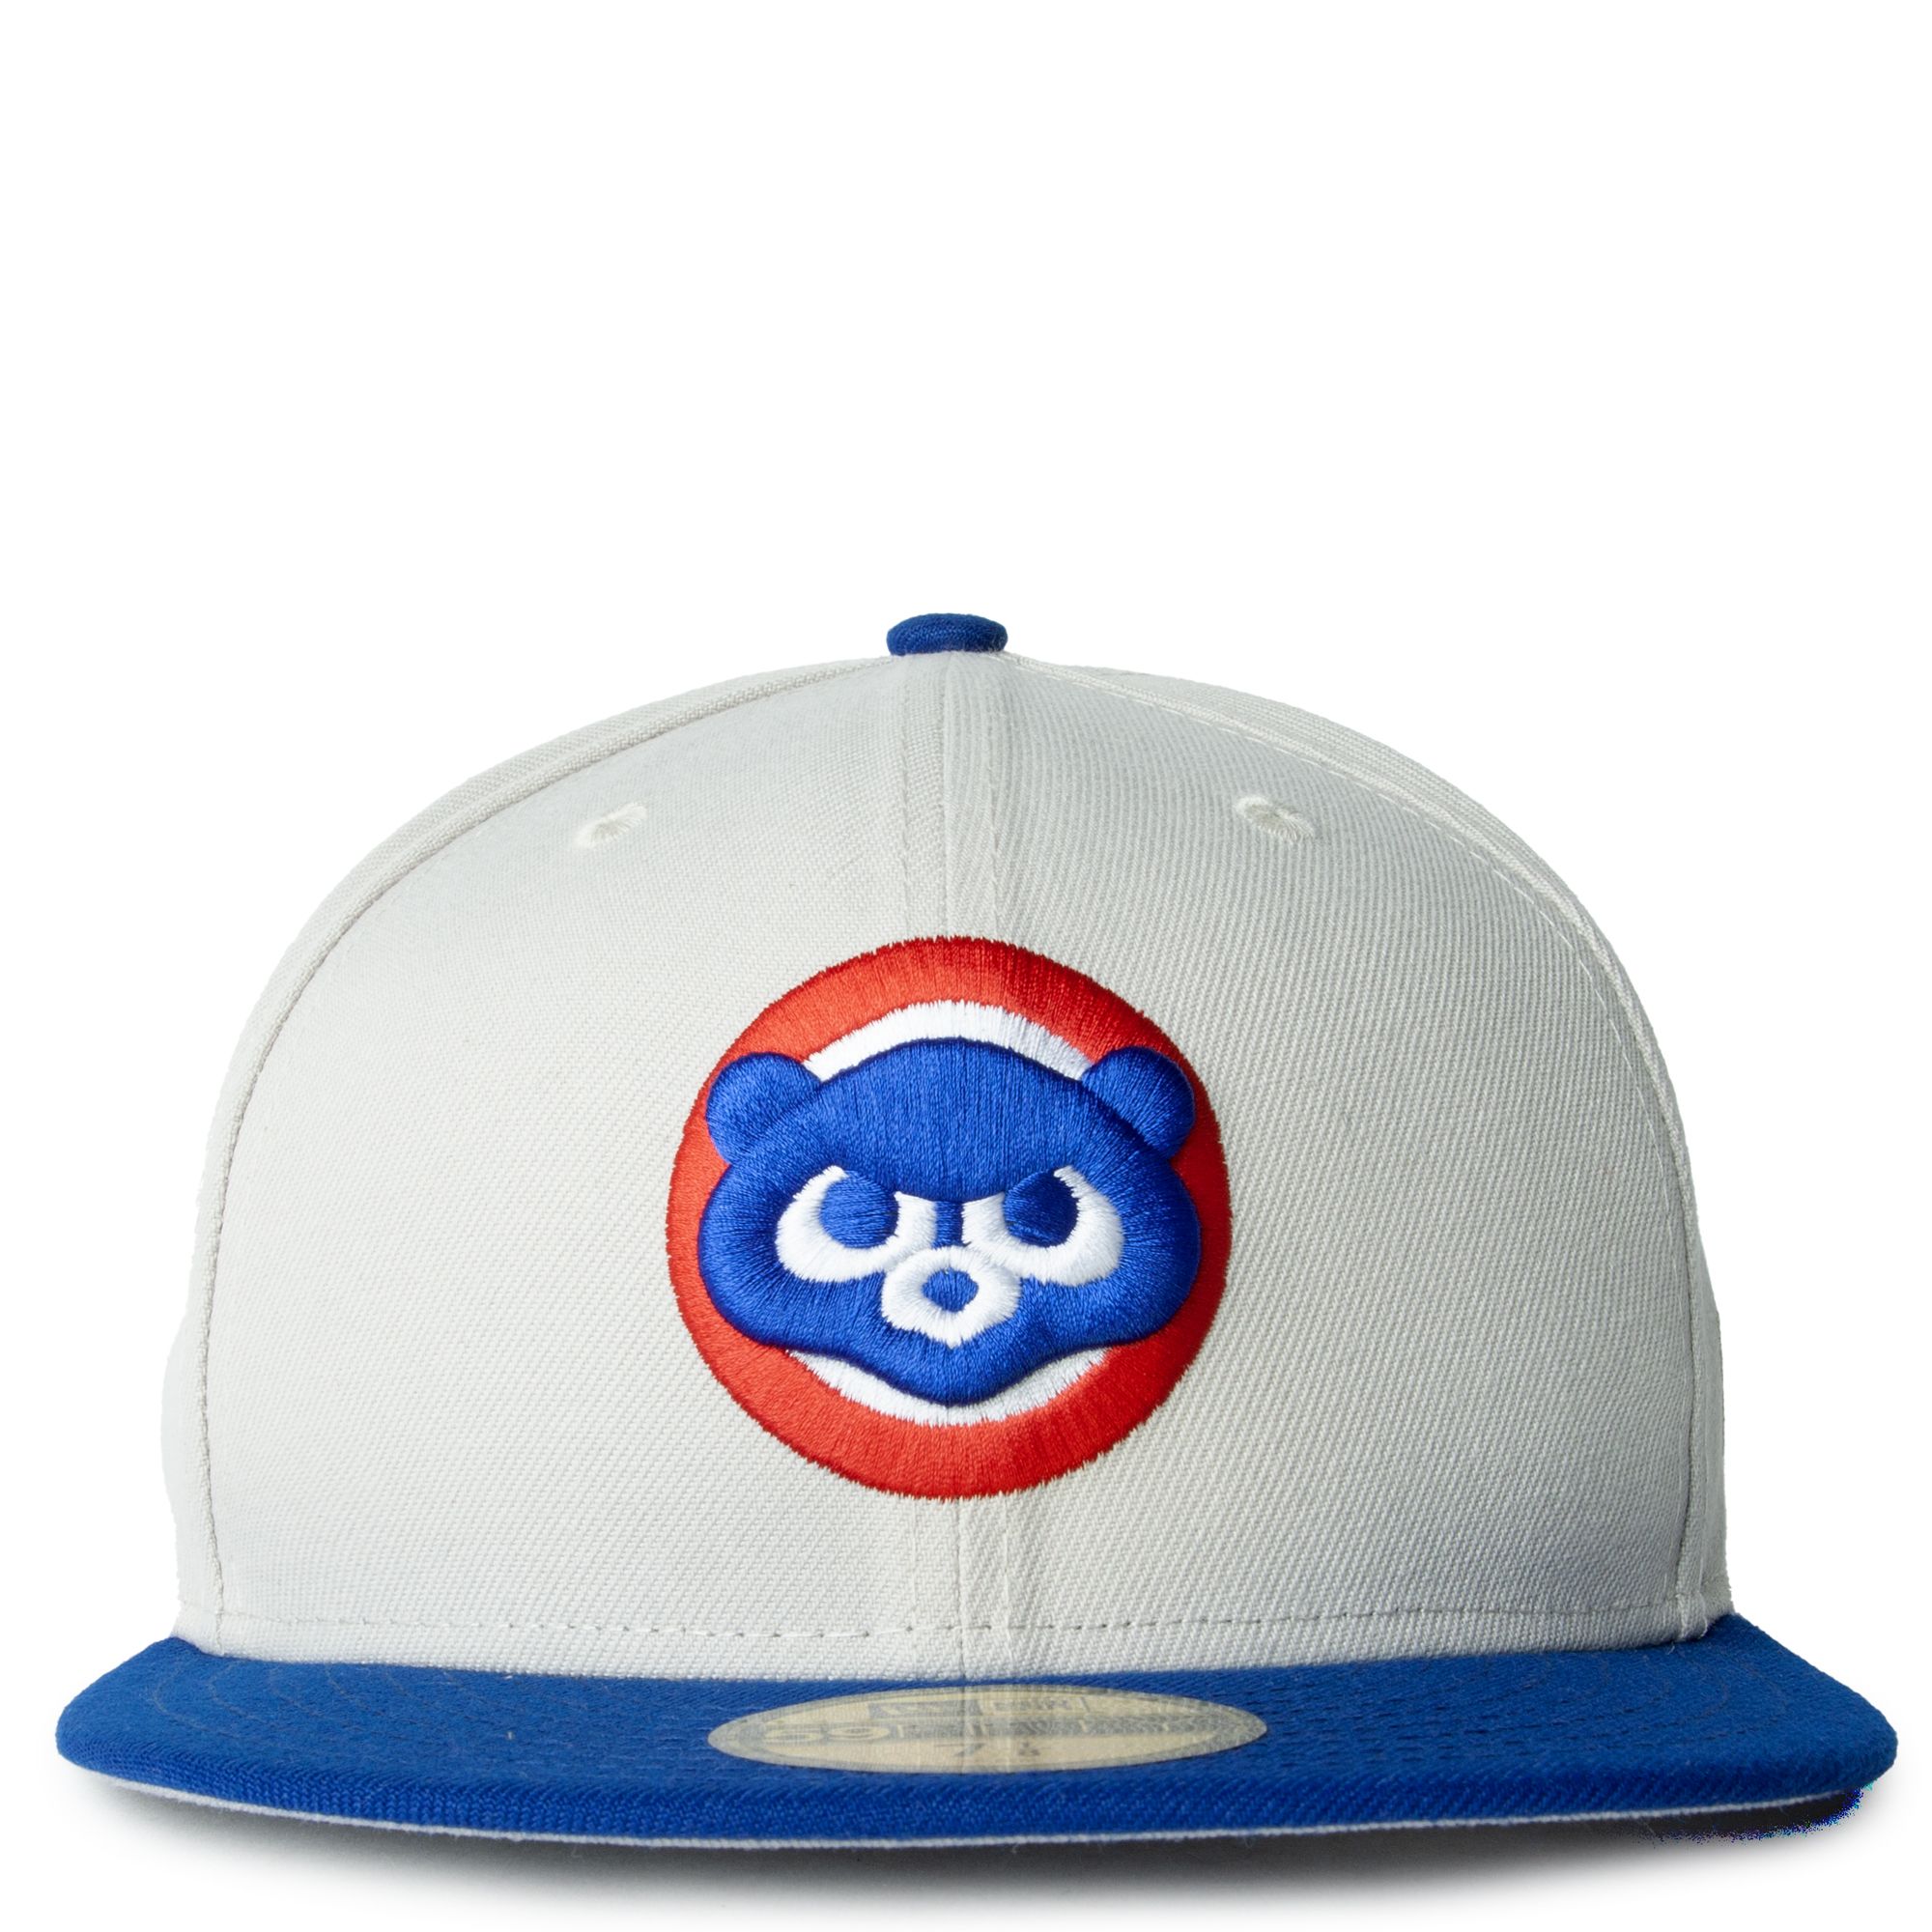 Official Chicago Cubs Baseball Hats, Cubs Caps, Cubs Hat, Beanies